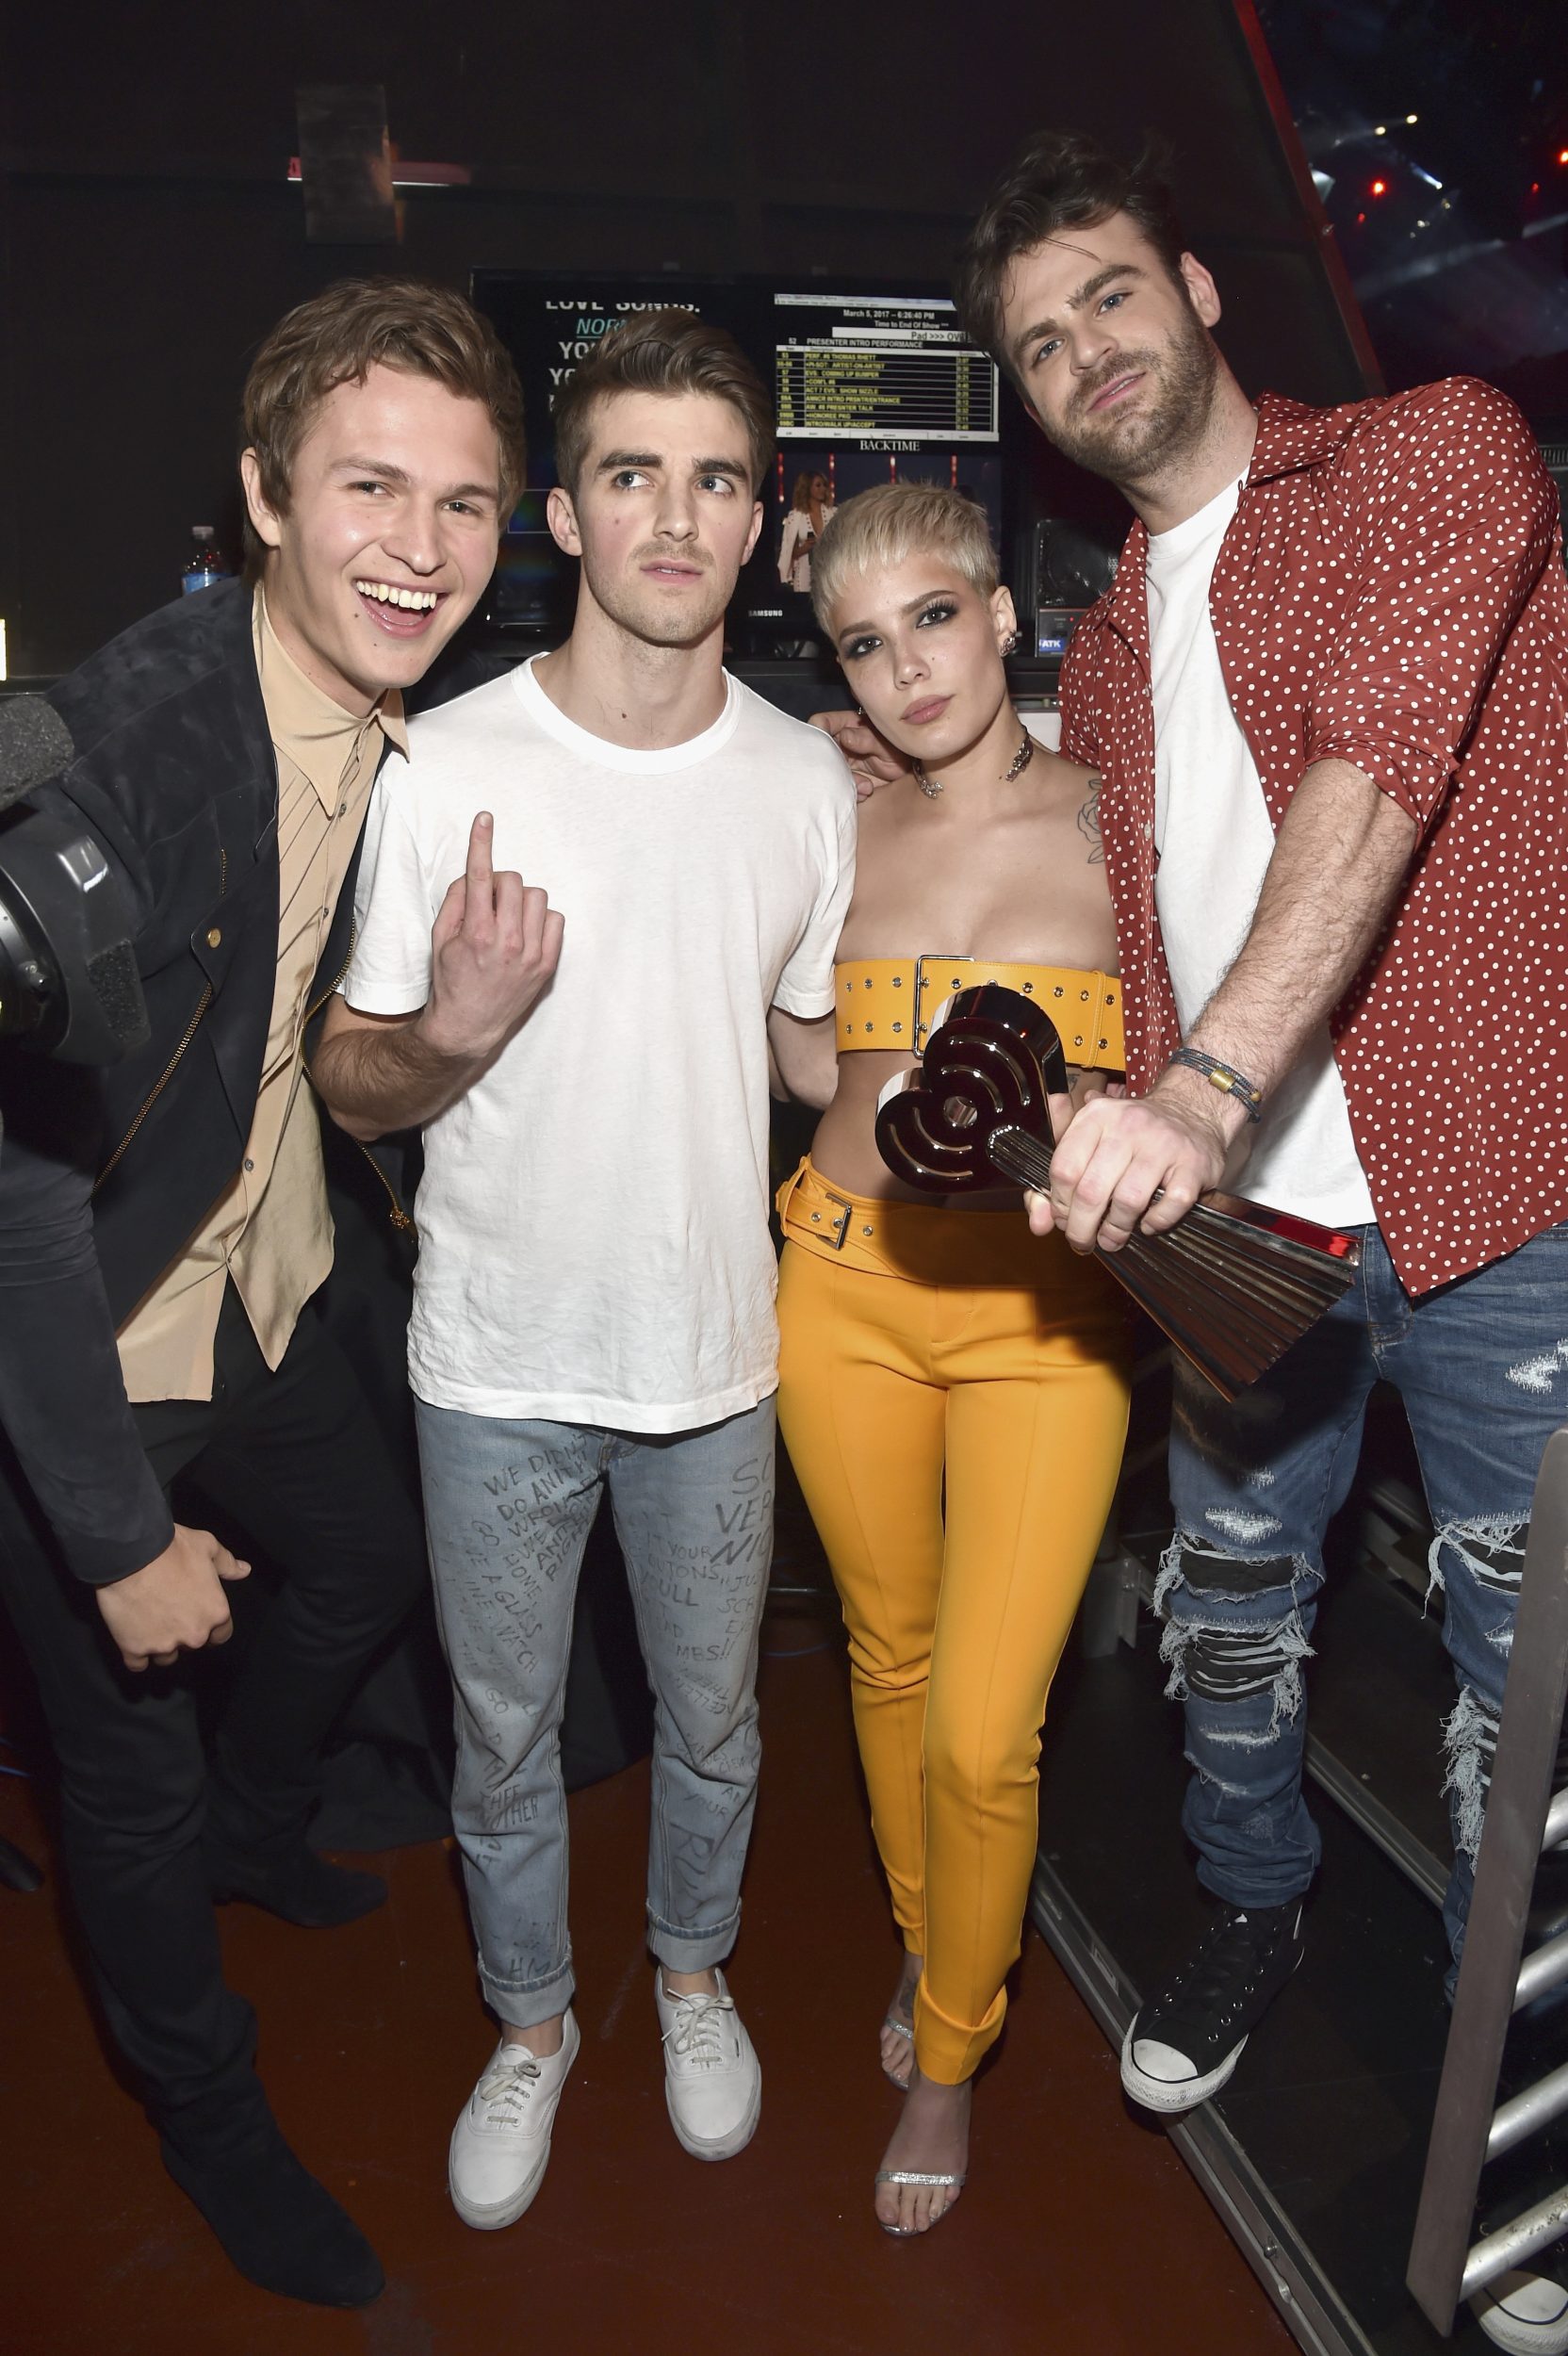 INGLEWOOD, CA - MARCH 05: Actor Ansel Elgort (L) poses backstage with DJs Drew Taggart (2nd L) and Alex Pall (R) of The Chainsmokers and singer Halsey (2nd R), winners of Dance Song of the Year for 'Closer,' at the 2017 iHeartRadio Music Awards which broadcast live on Turner's TBS, TNT, and truTV at The Forum on March 5, 2017 in Inglewood, California. (Photo by Frazer Harrison/Getty Images for iHeartMedia) *** Local Caption *** Ansel Elgort; Drew Taggart; Alex Pall; Halsey